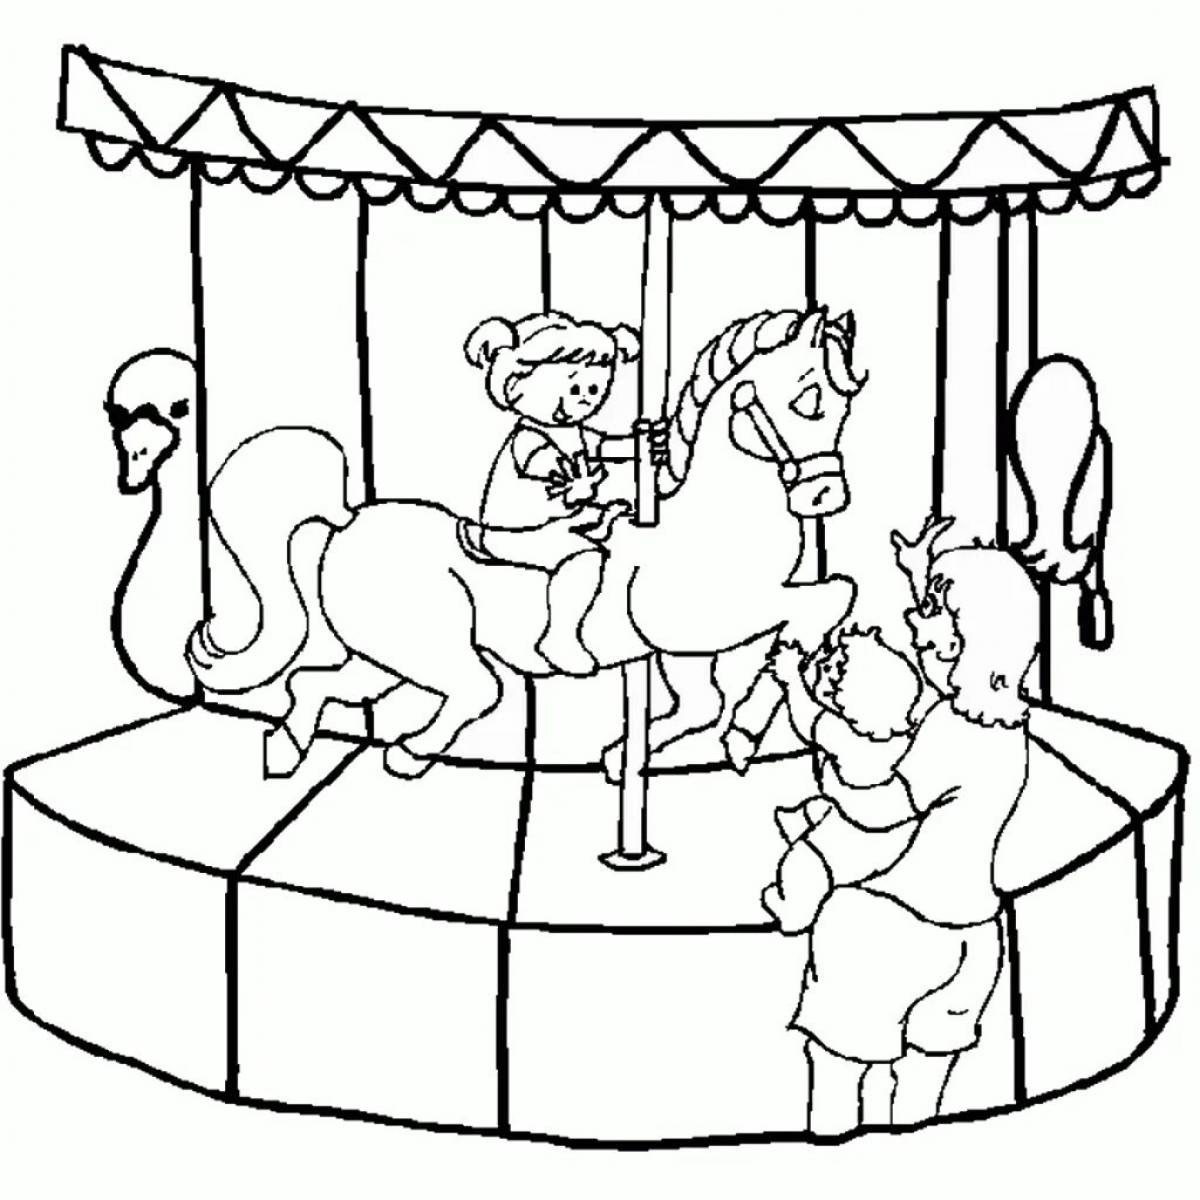 Exquisite carousel coloring for toddlers